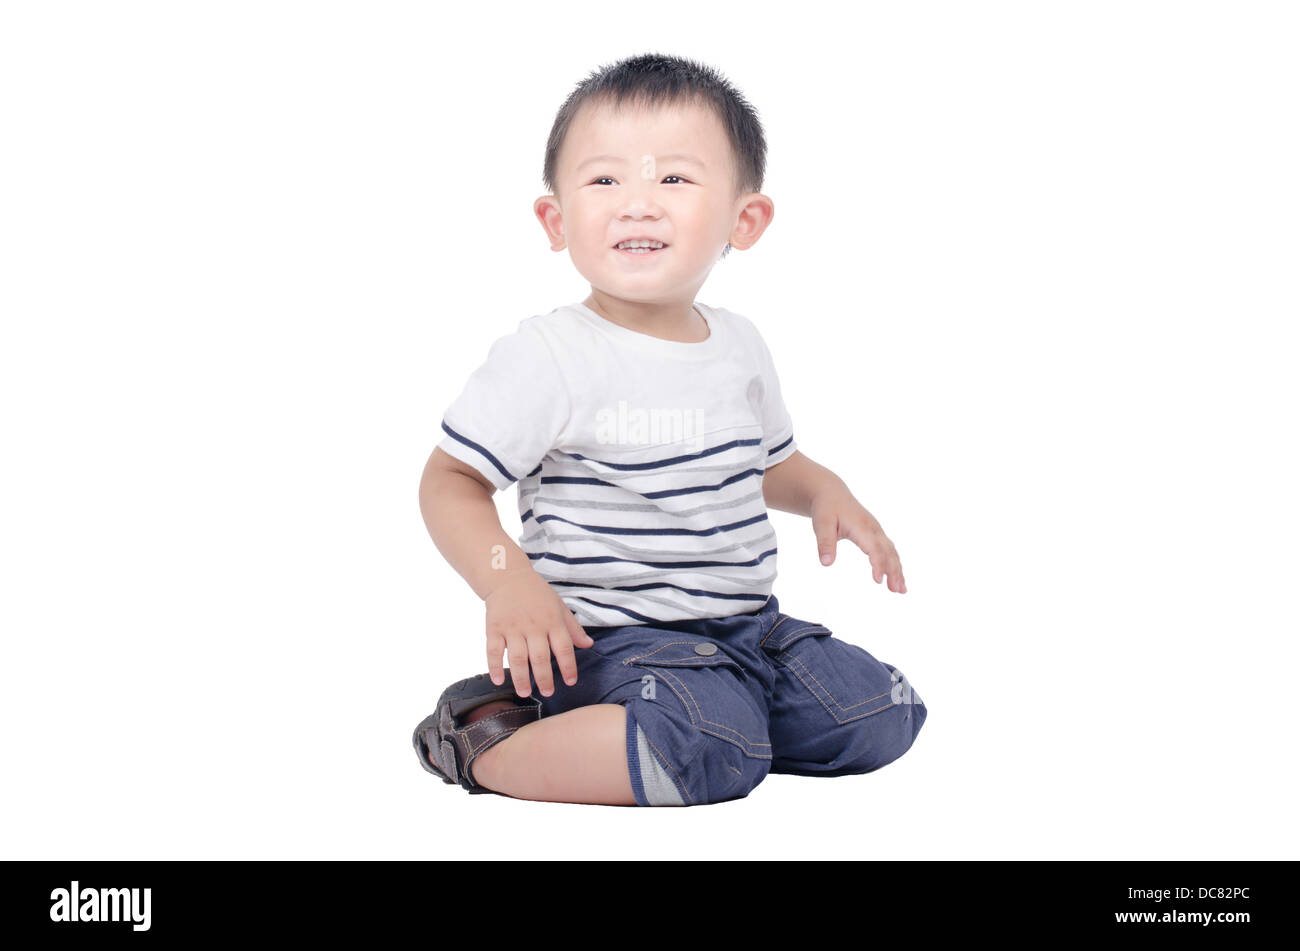 Smiling kid sit on the floor over white background Stock Photo